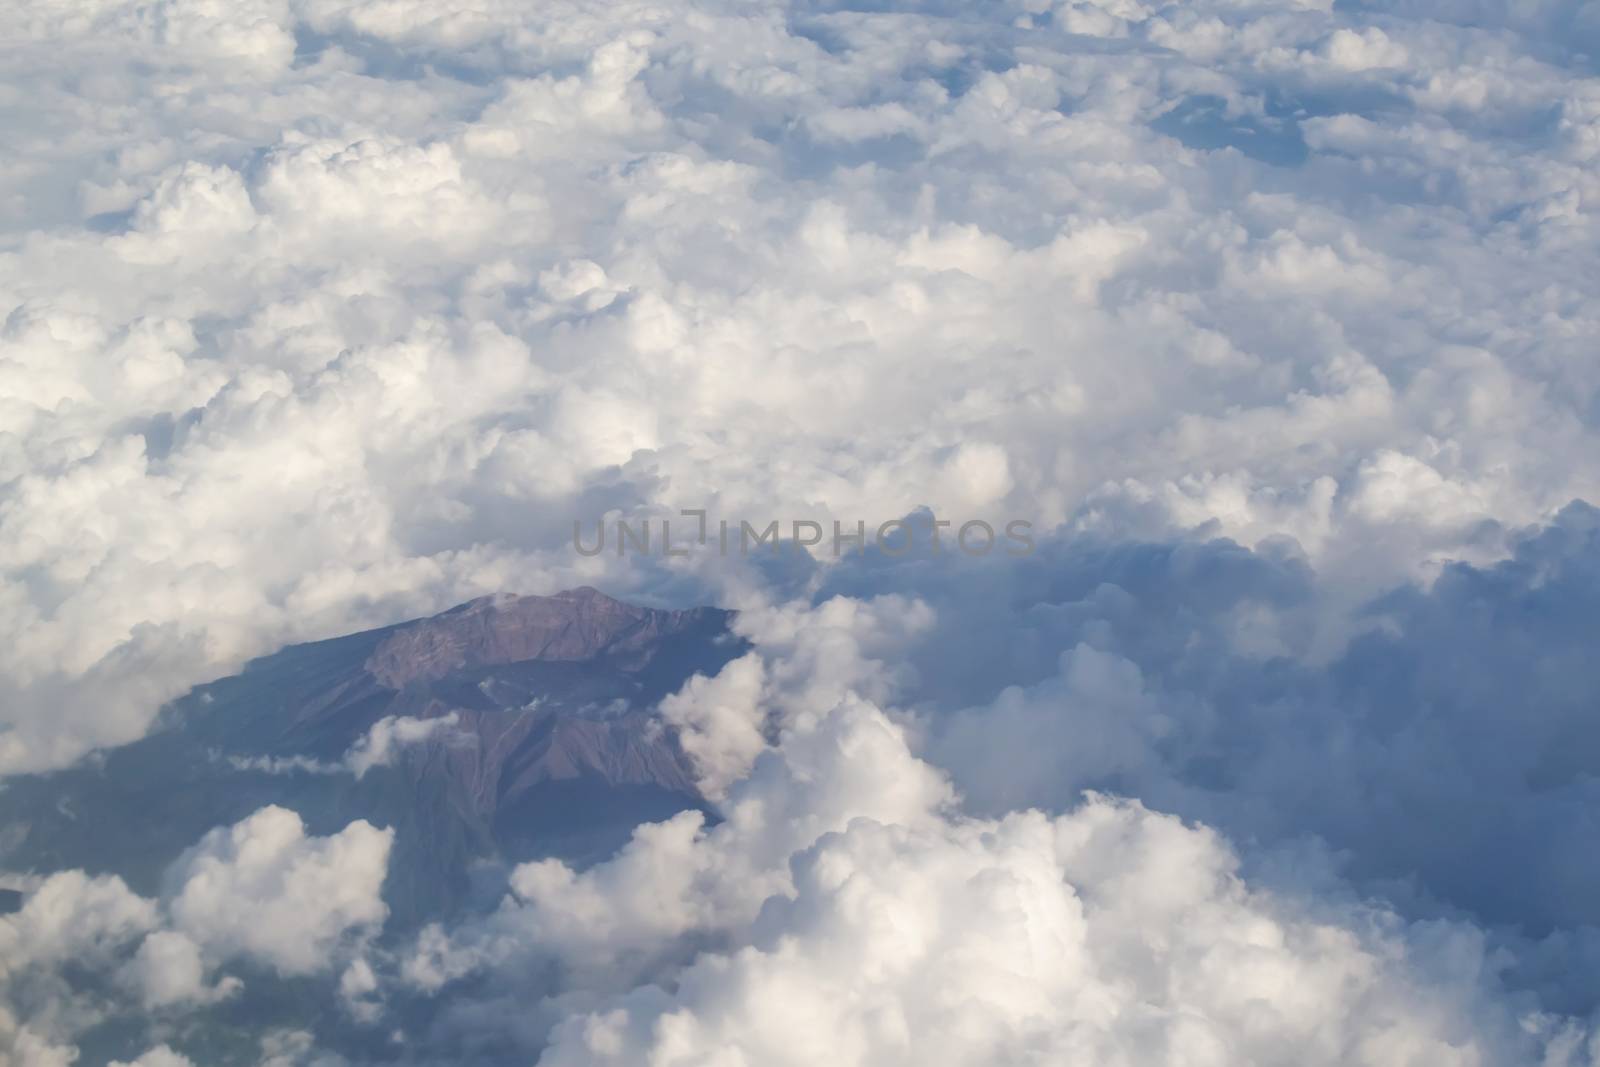 The sky with beautiful white clouds and mountain taken on airplane